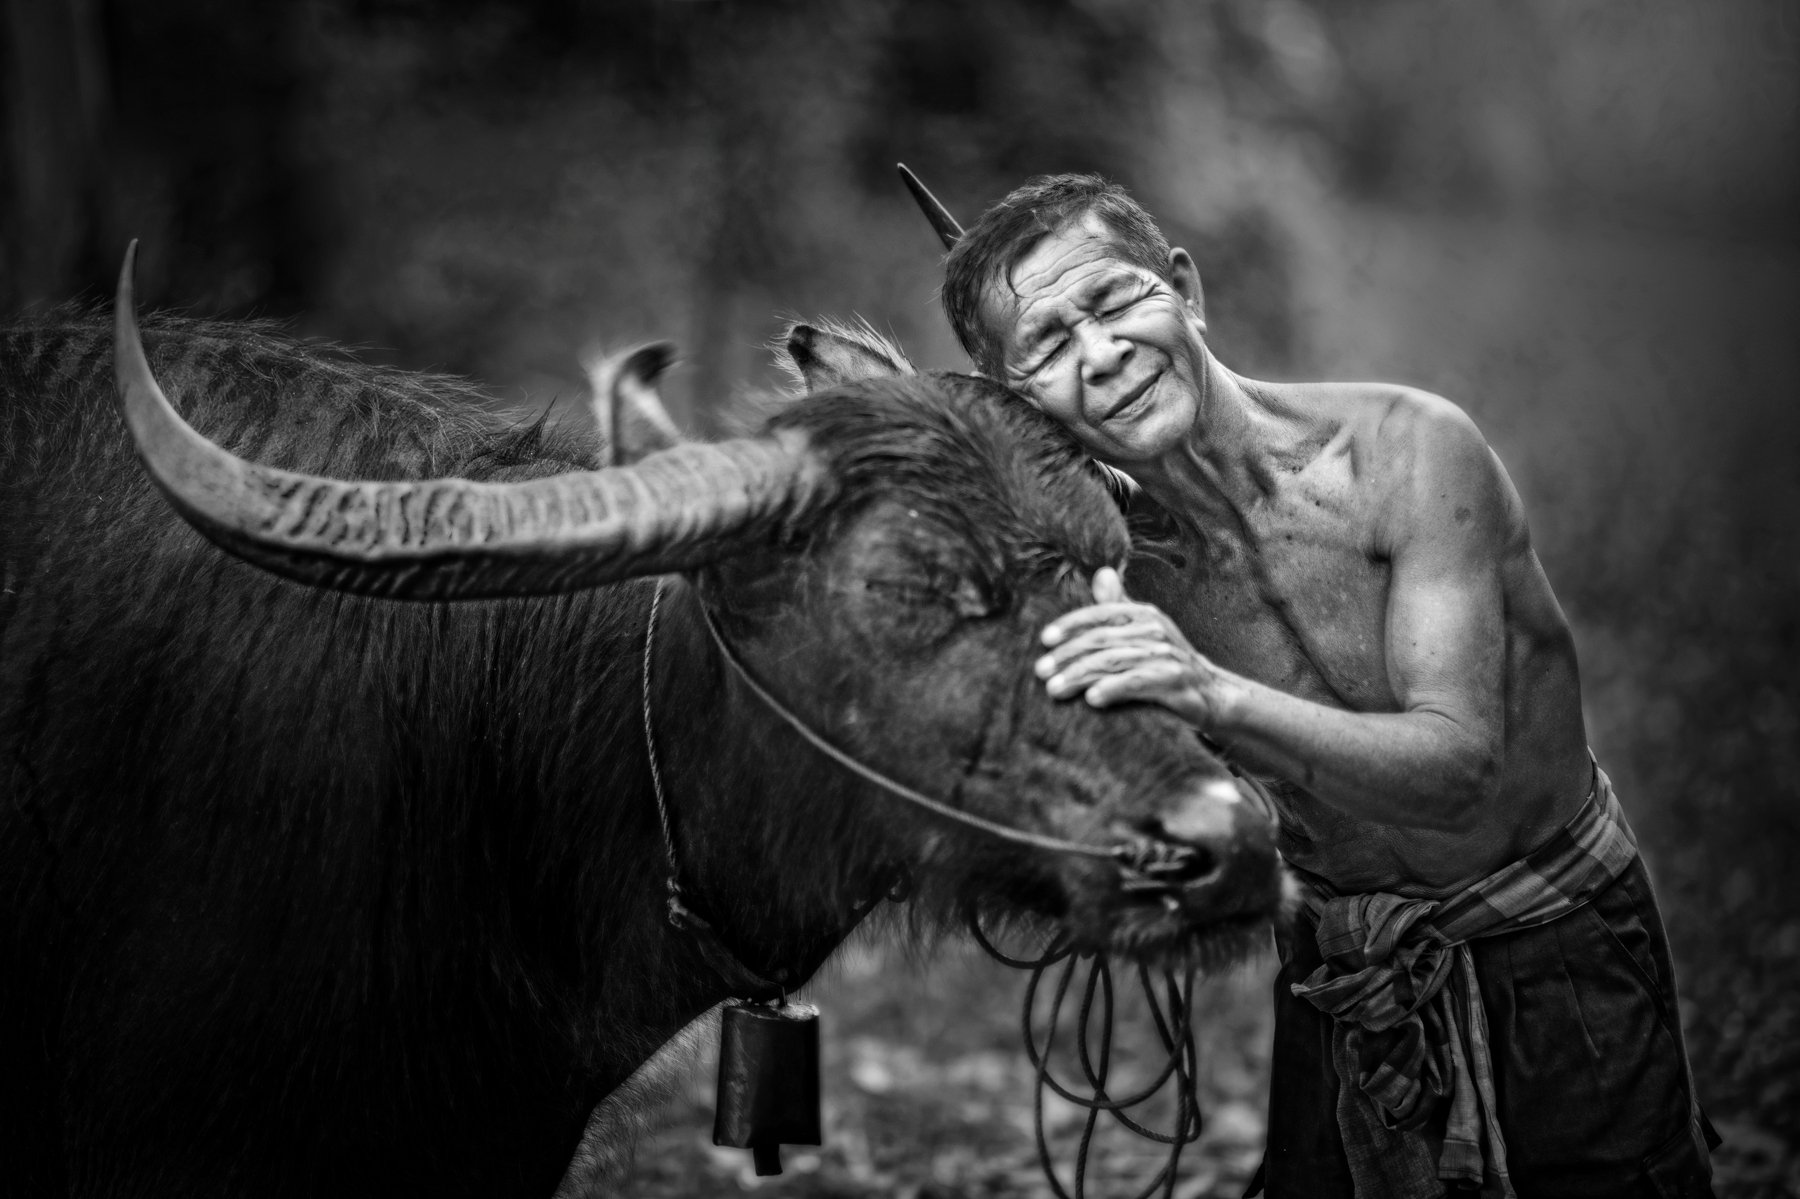 Black And White, Friendship, Animal Themes, Thailand, Asian and Indian Ethnicities, Shirtless, Water Buffalo, 55-59 Years, Adult, Adults Only, Cow Bell, Day, Domestic Animals, Eyes Closed, Focus On Foreground, Front View, Horizontal, Love, Mature Adult, O, sarawut intarob